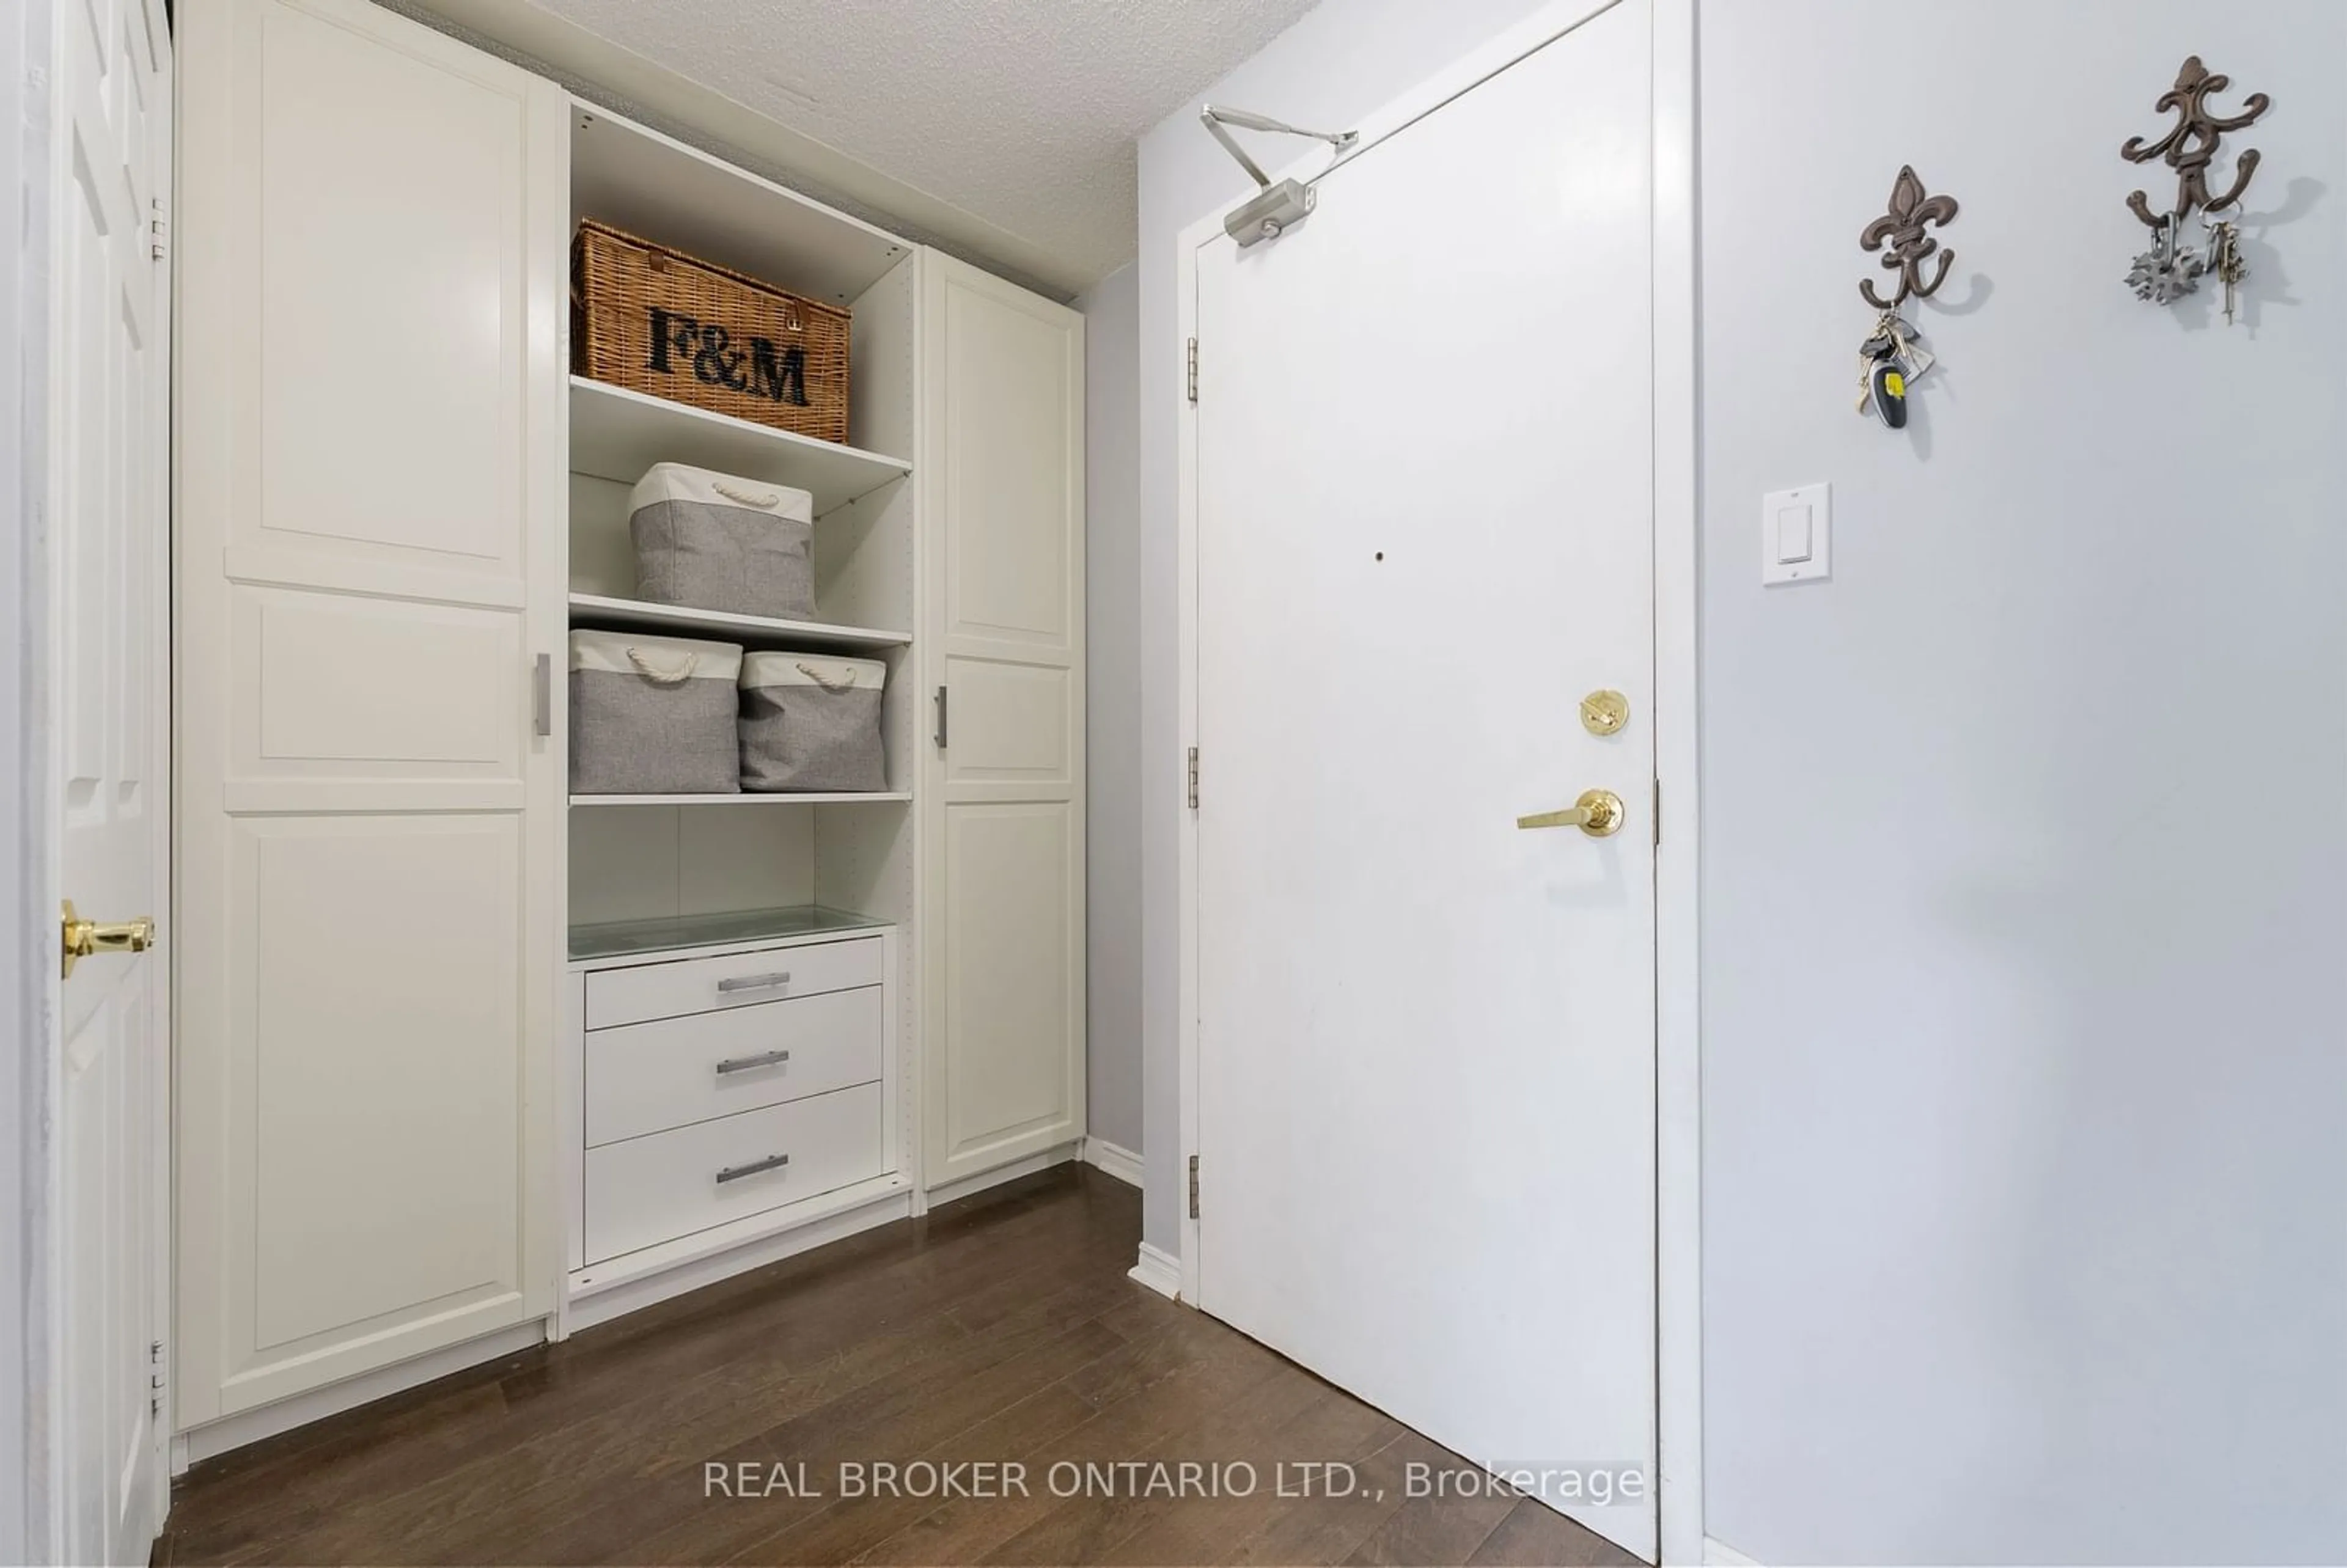 Storage room or clothes room or walk-in closet for 300 Balliol St #611, Toronto Ontario M4S 3G6